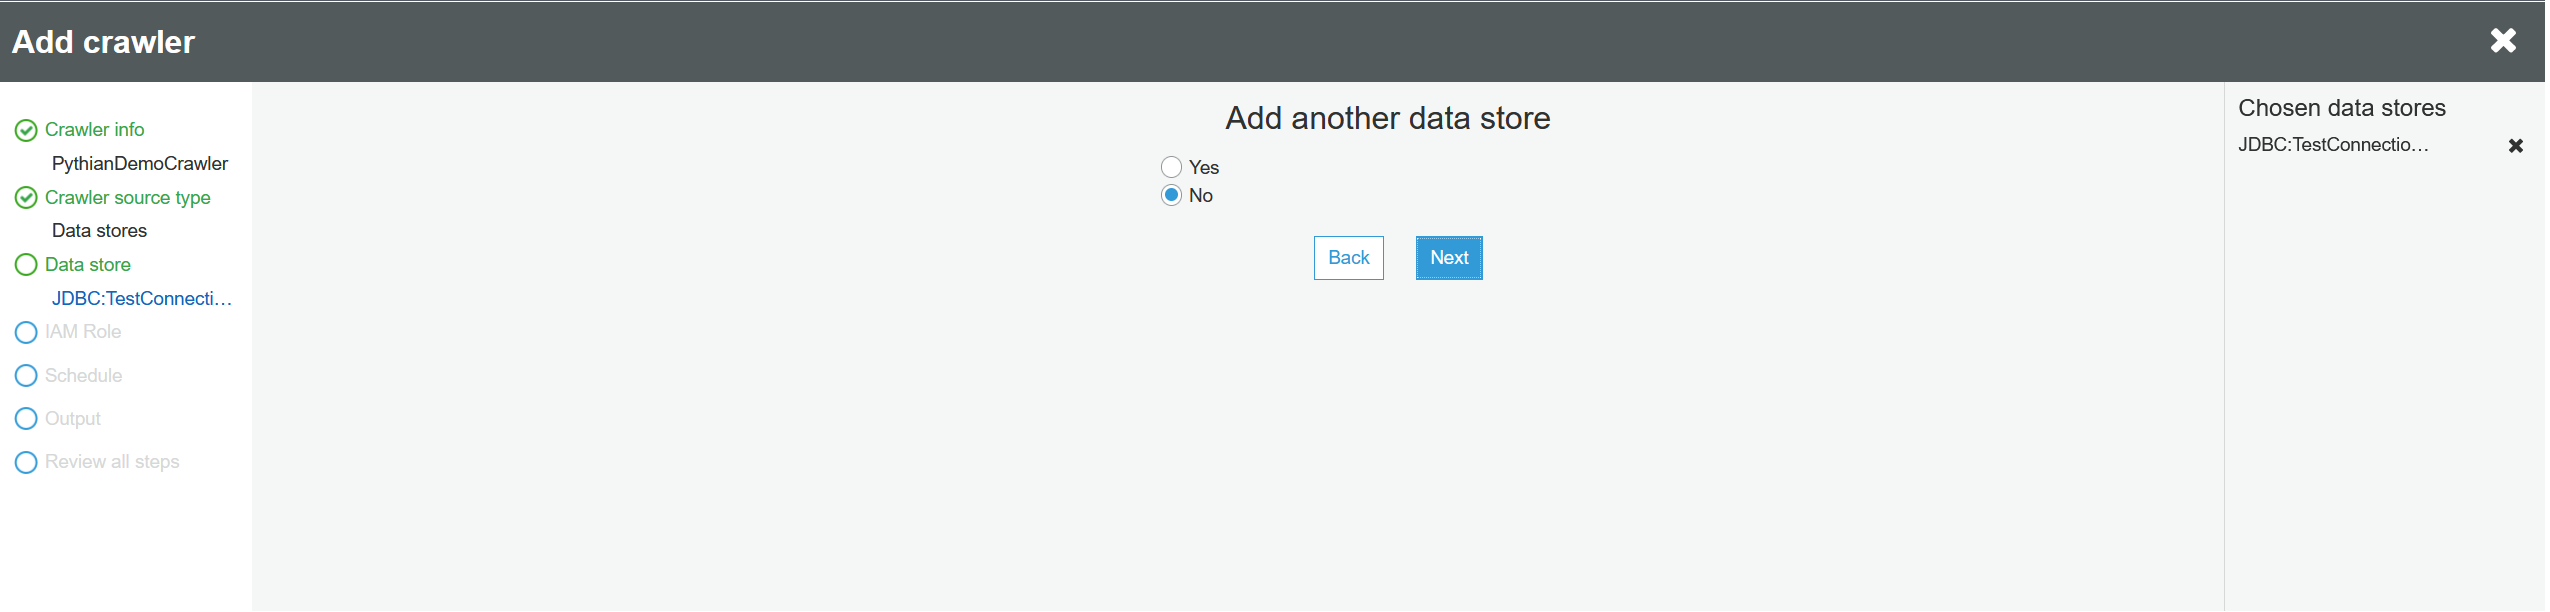 Adding another data store.